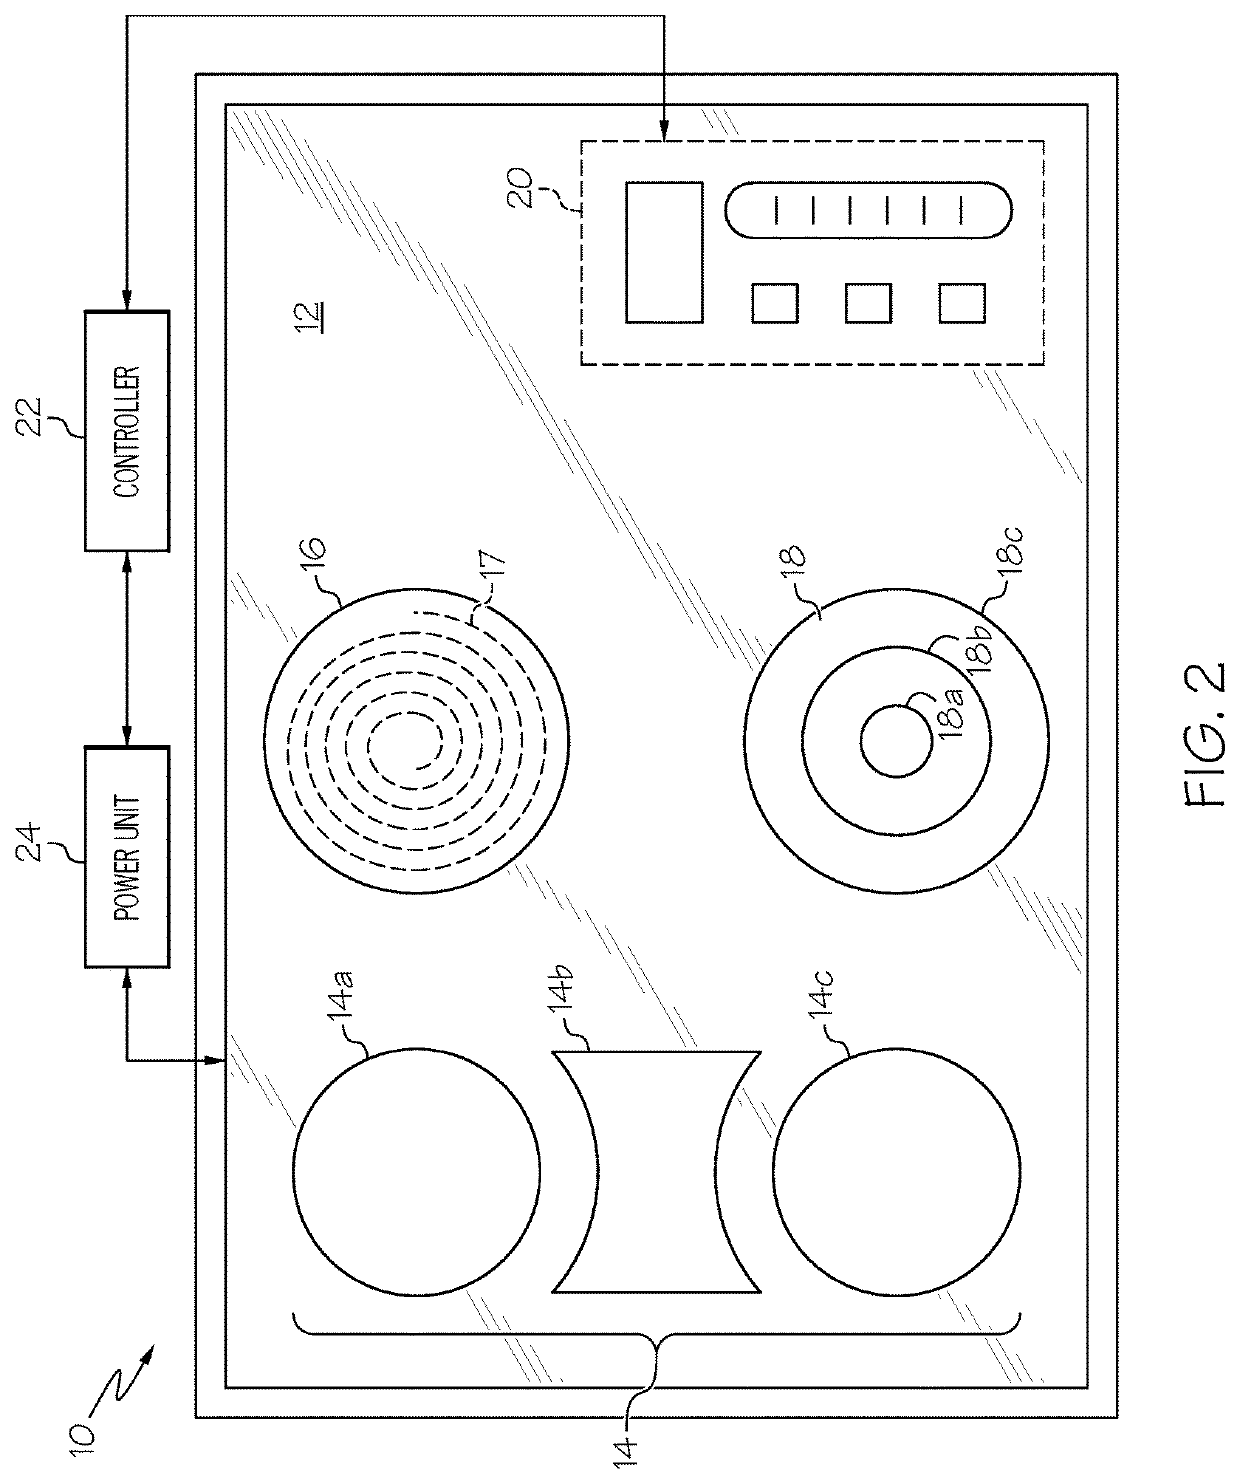 Appliance with electrovibration user feedback in a touch panel interface